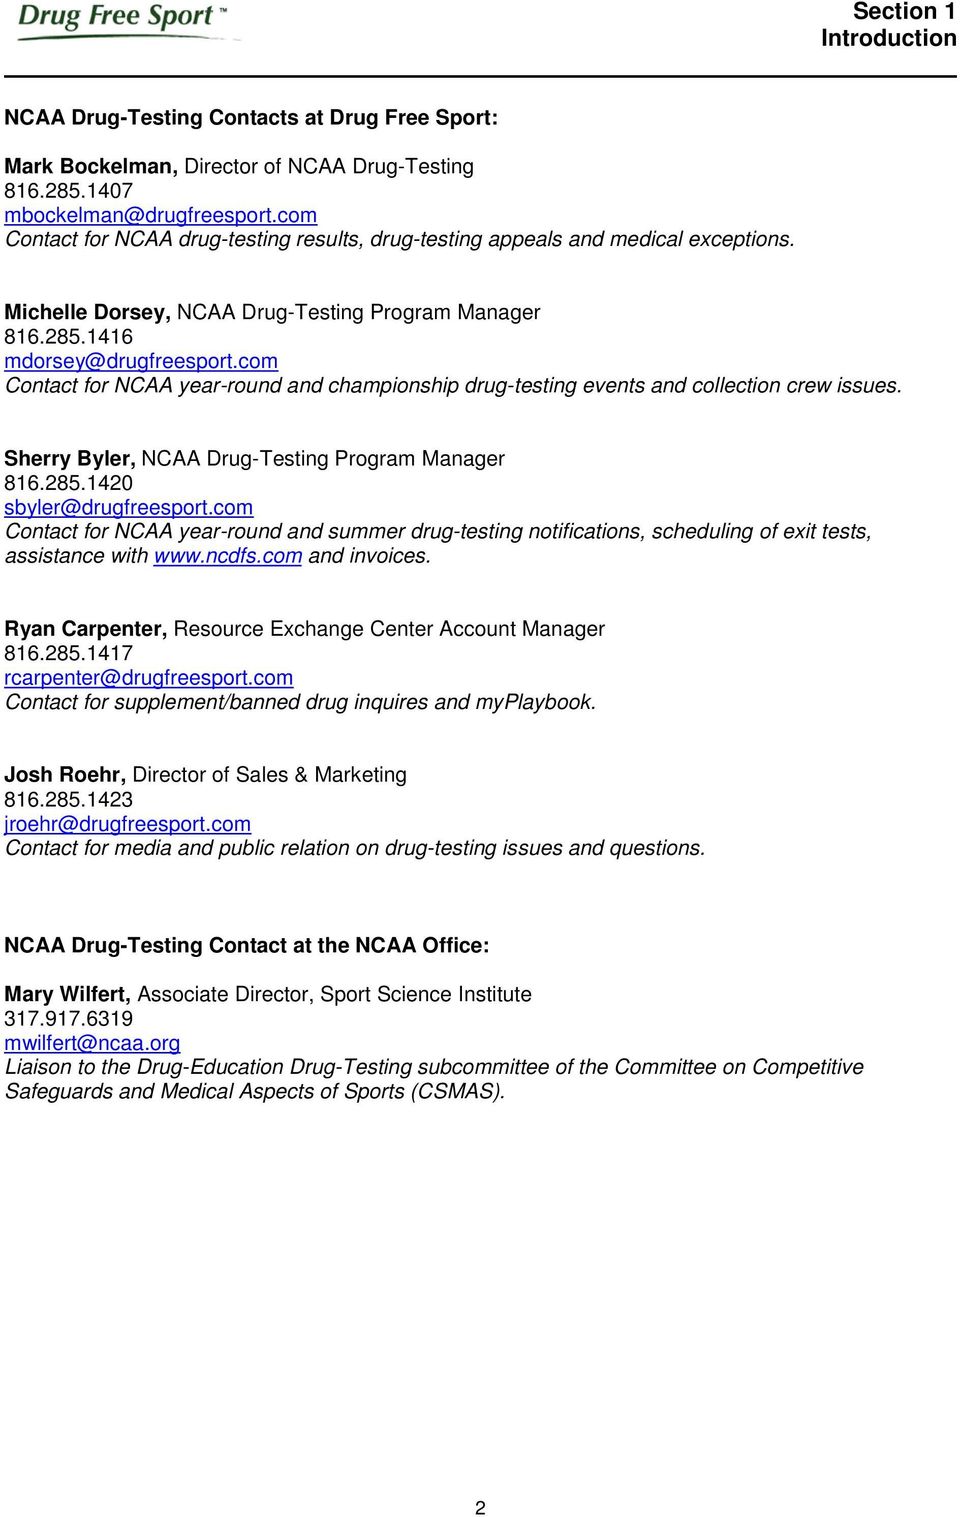 com Contact for NCAA year-round and championship drug-testing events and collection crew issues. Sherry Byler, NCAA Drug-Testing Program Manager 816.285.1420 sbyler@drugfreesport.